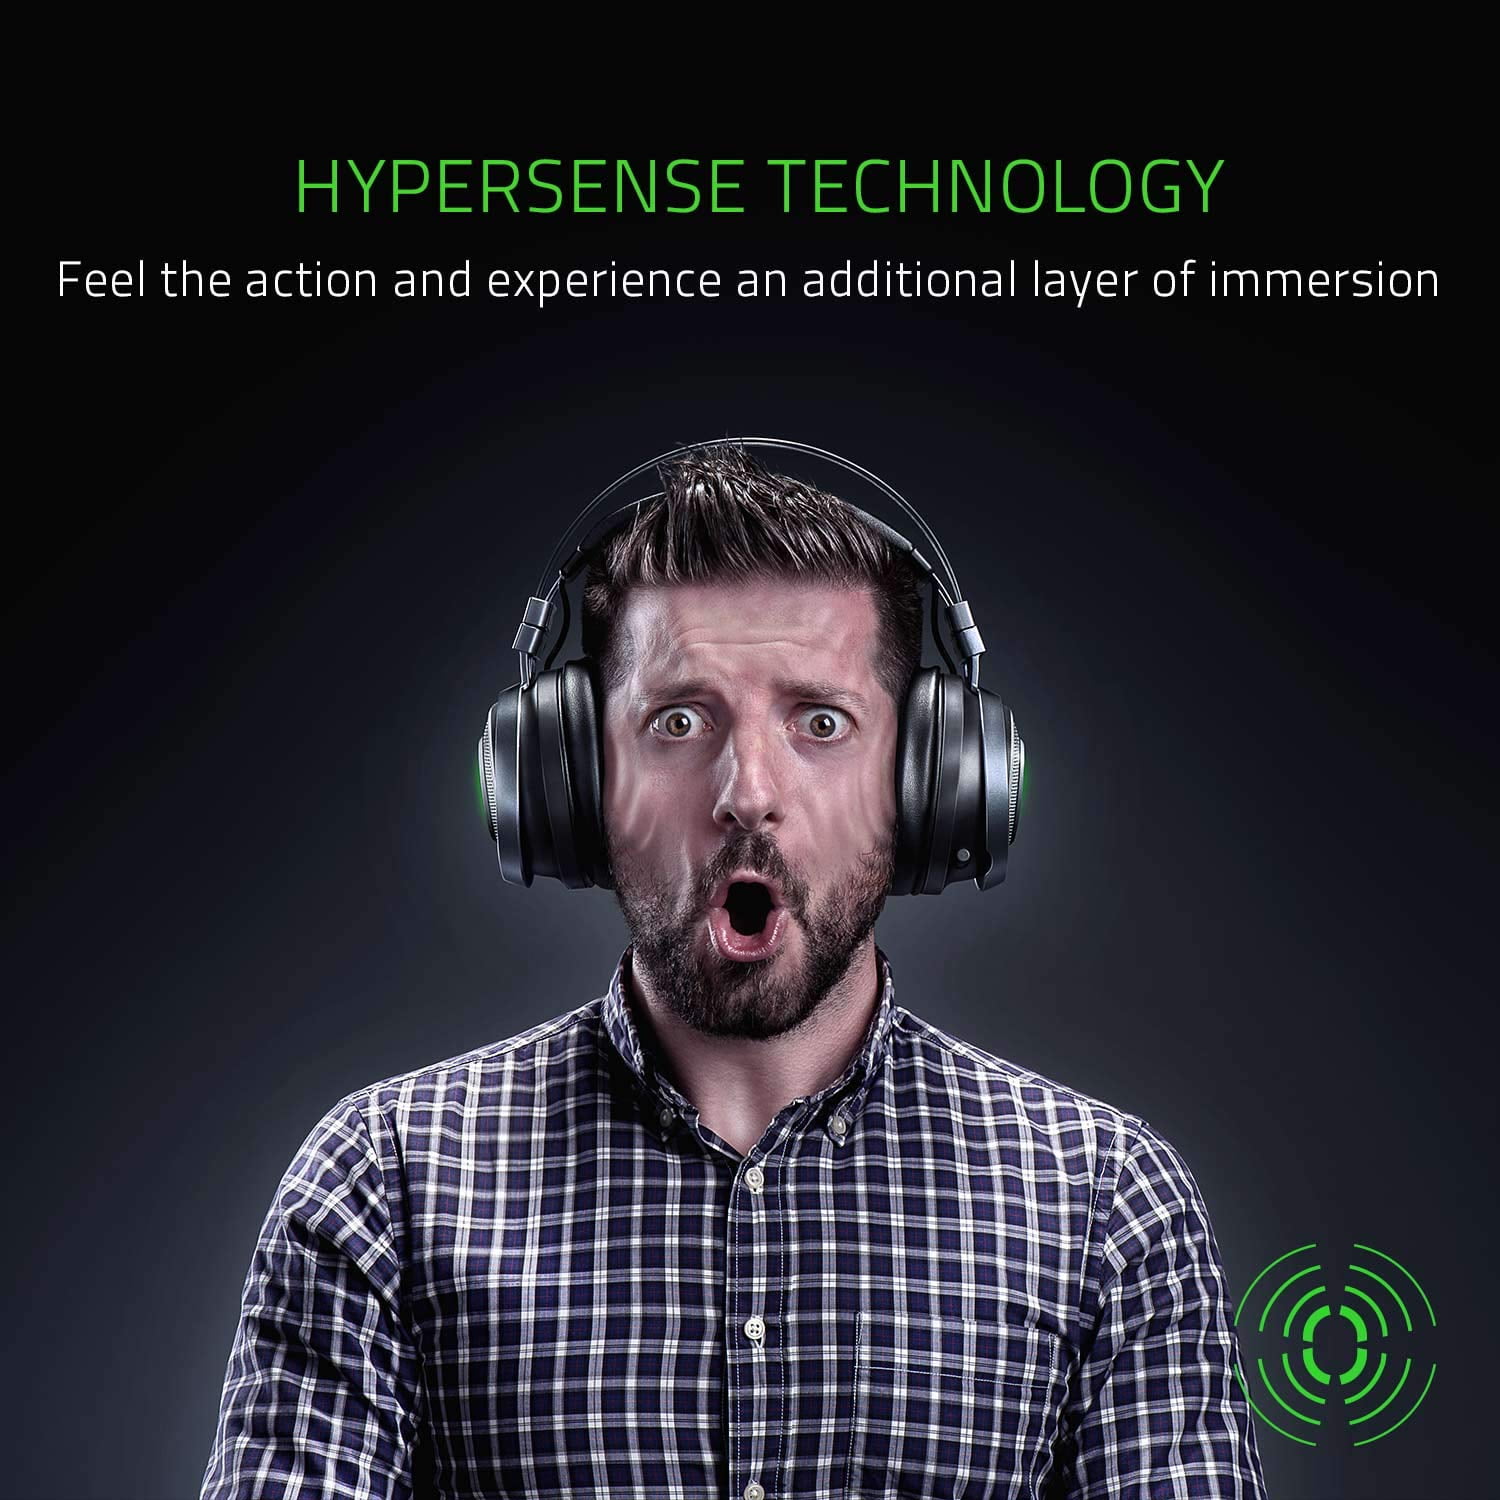 Razer Nari Ultimate Thx Spatial Audio Hypersense Technology 2 4ghz Wireless Audio Cooling Gel Infused Cushions Gaming Headset Works With Pc Ps4 Xbox One Switch Mobile Devices Walmart Com Walmart Com